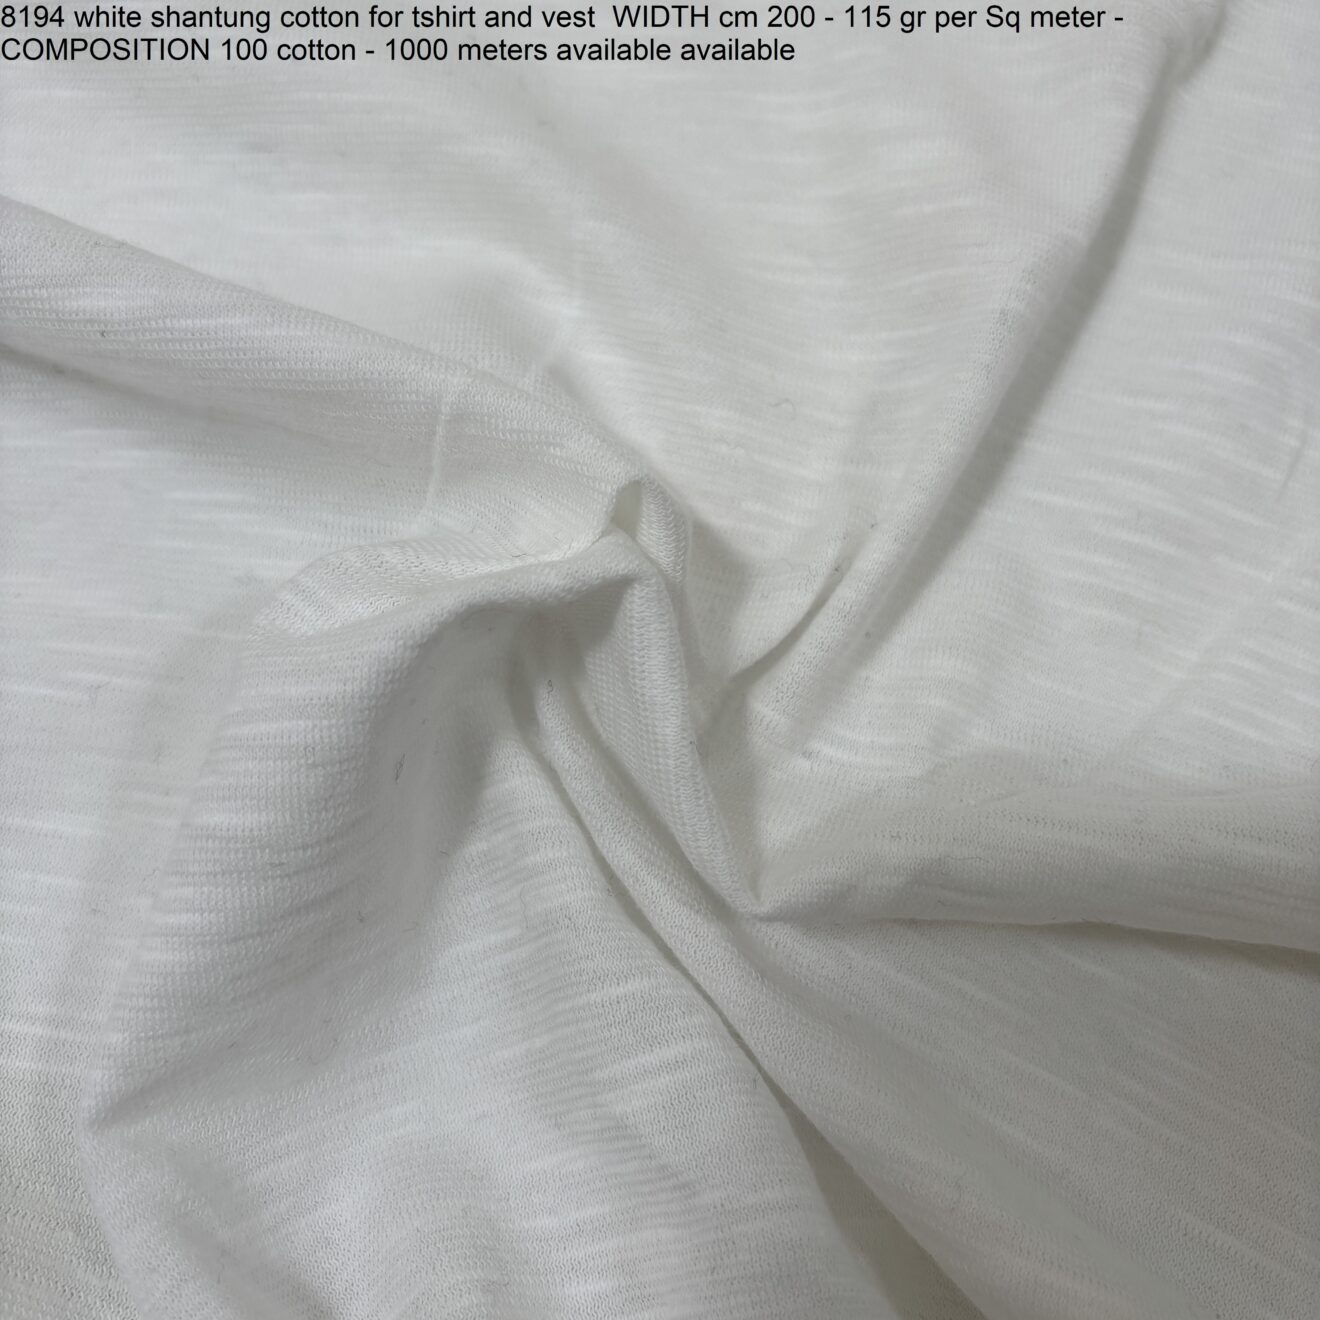 8194 white shantung cotton for tshirt and vest WIDTH cm 200 - 115 gr per Sq meter - COMPOSITION 100 cotton - 1000 meters available